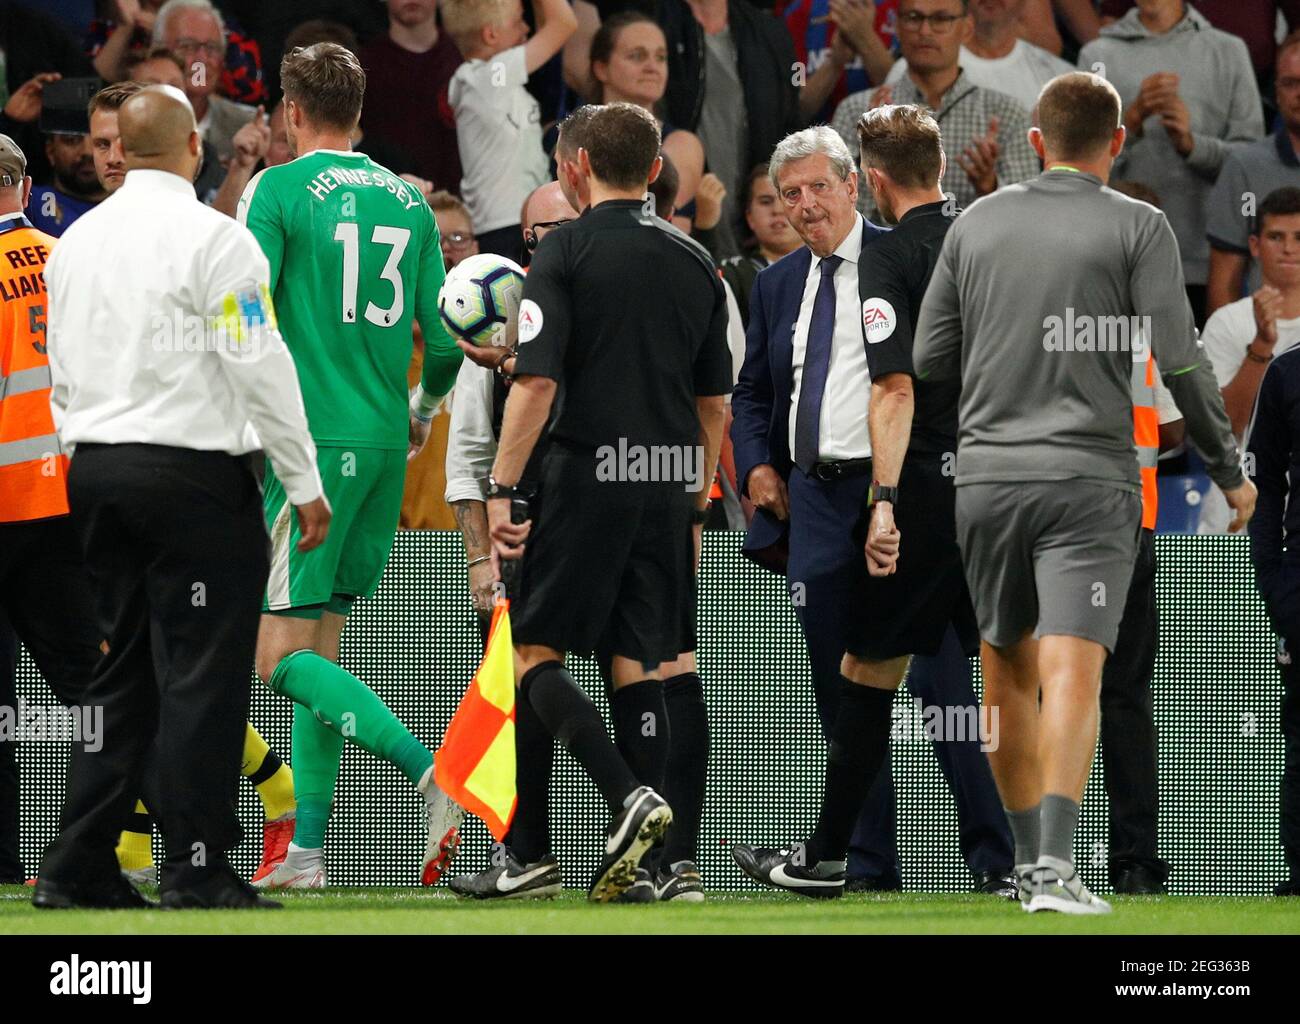 Soccer Football - Premier League - Crystal Palace v Liverpool - Selhurst Park, London, Britain - August 20, 2018  Crystal Palace manager Roy Hodgson with referee Michael Oliver after the match                           Action Images via Reuters/John Sibley  EDITORIAL USE ONLY. No use with unauthorized audio, video, data, fixture lists, club/league logos or 'live' services. Online in-match use limited to 75 images, no video emulation. No use in betting, games or single club/league/player publications.  Please contact your account representative for further details. Stock Photo